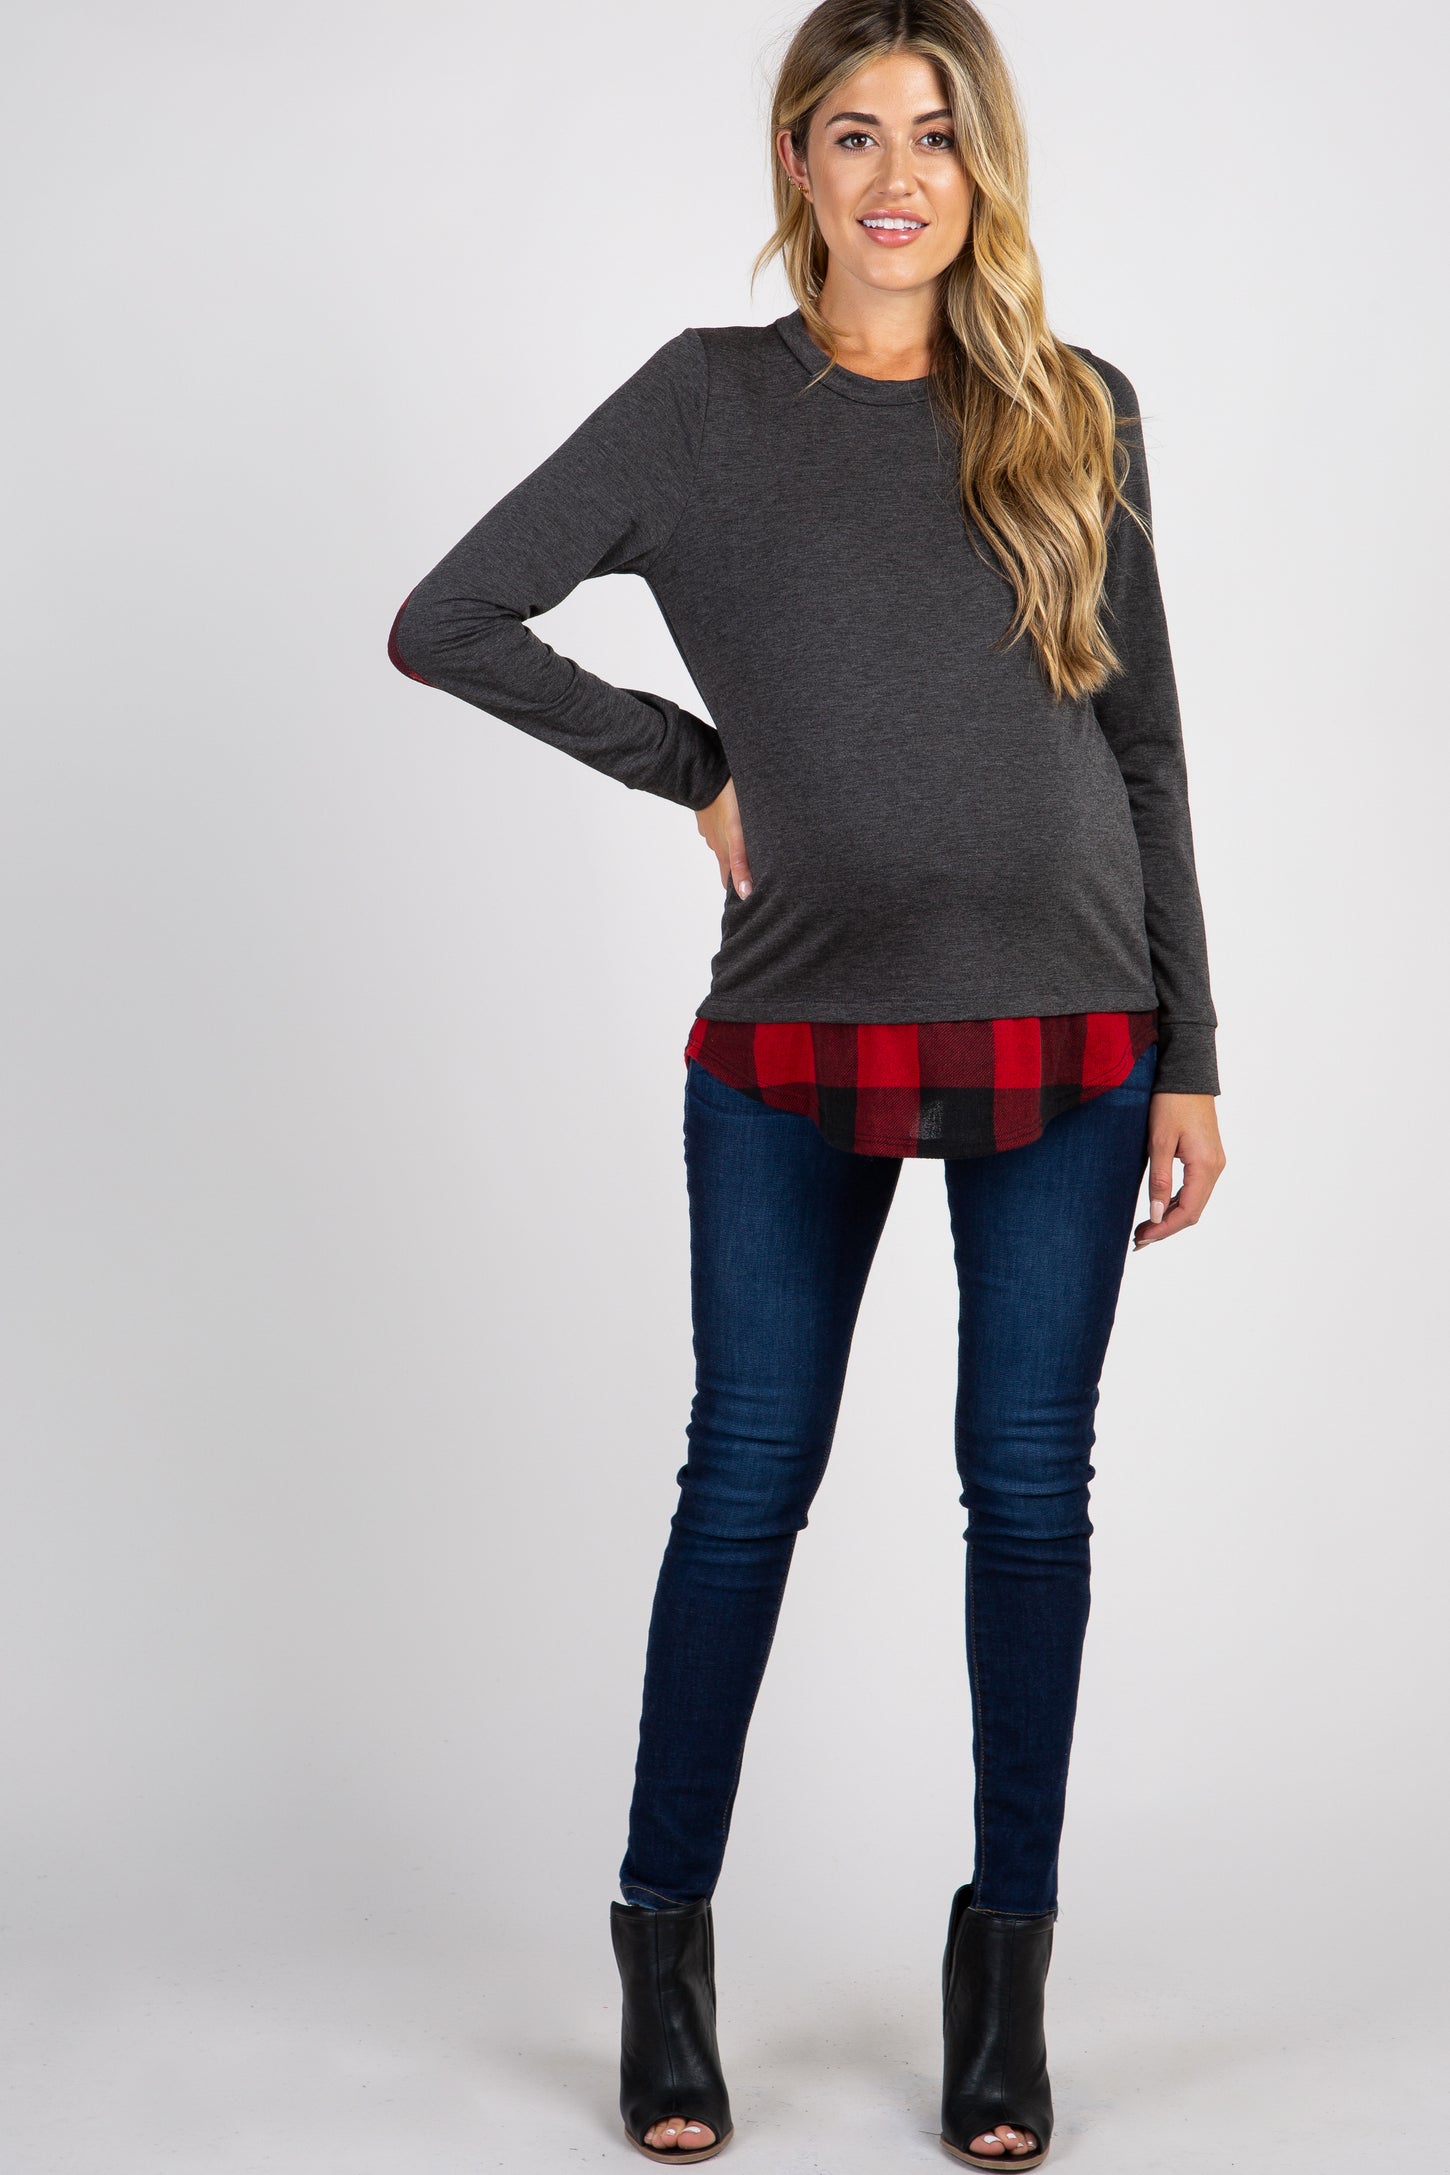 PinkBlush Charcoal Grey Solid Plaid Accent Long Sleeve Maternity Top